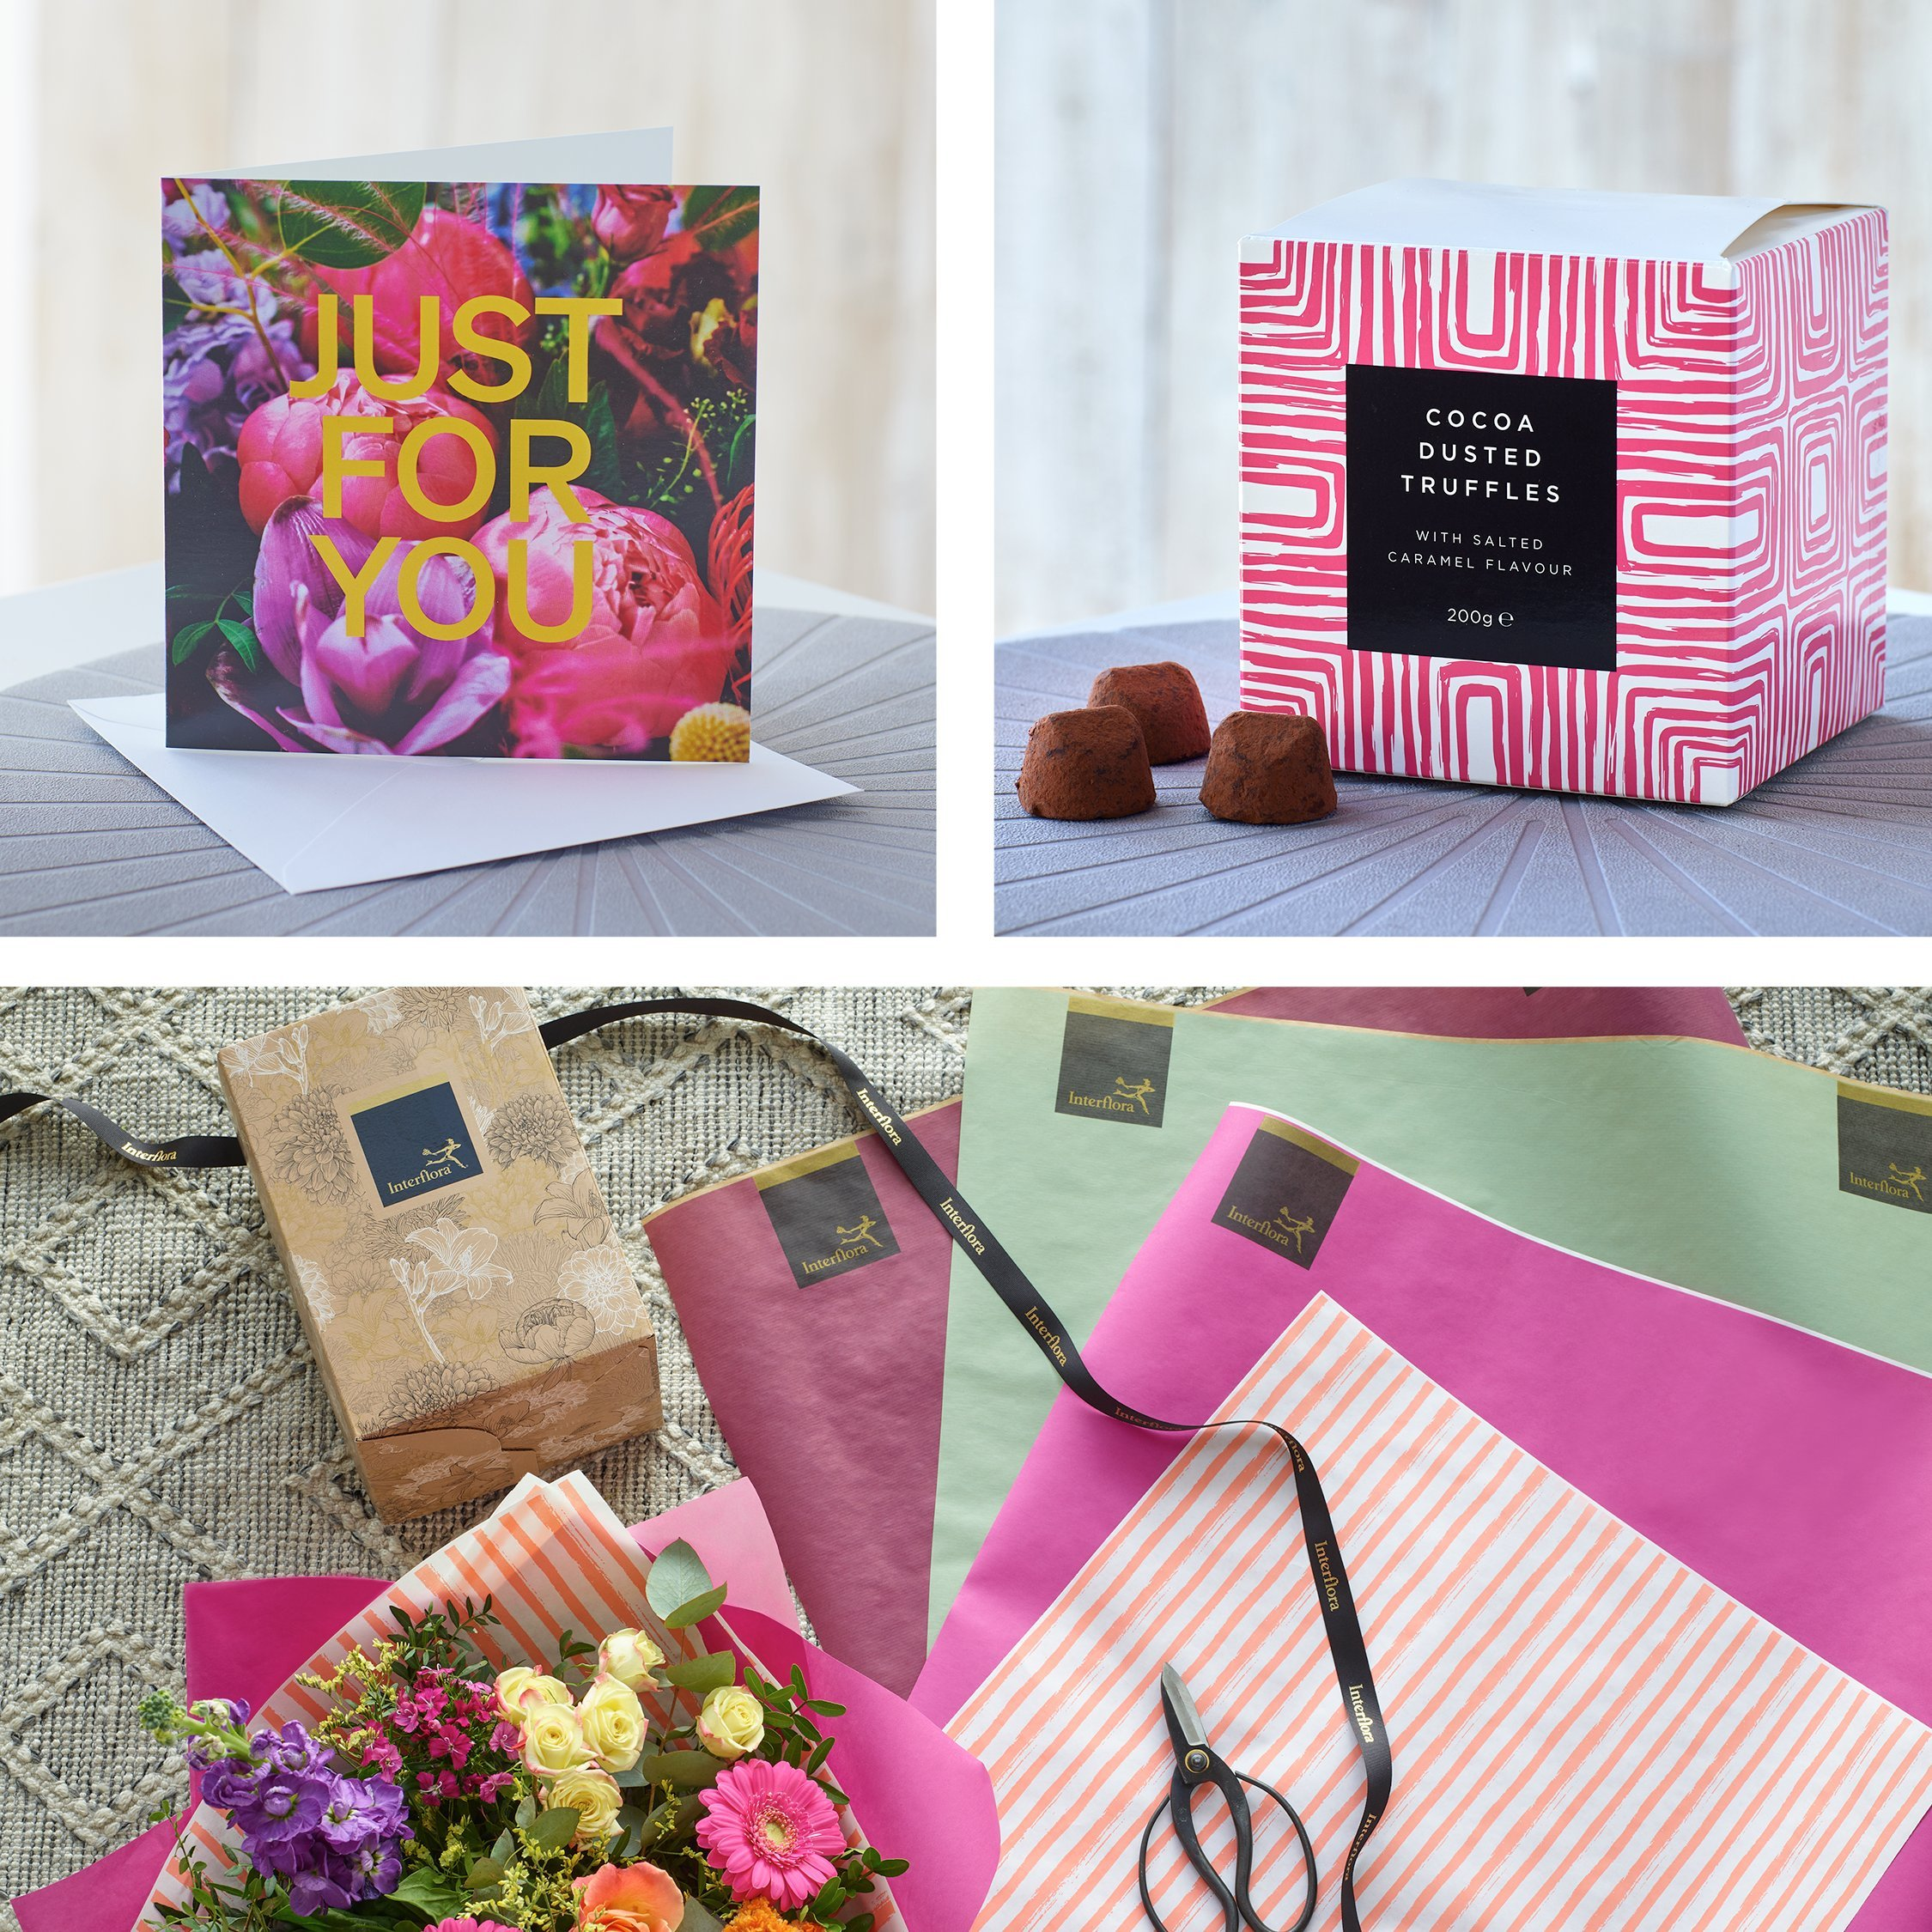 DIY Mother's Day Gifts in Under 15 Minutes! - Happiness is Homemade